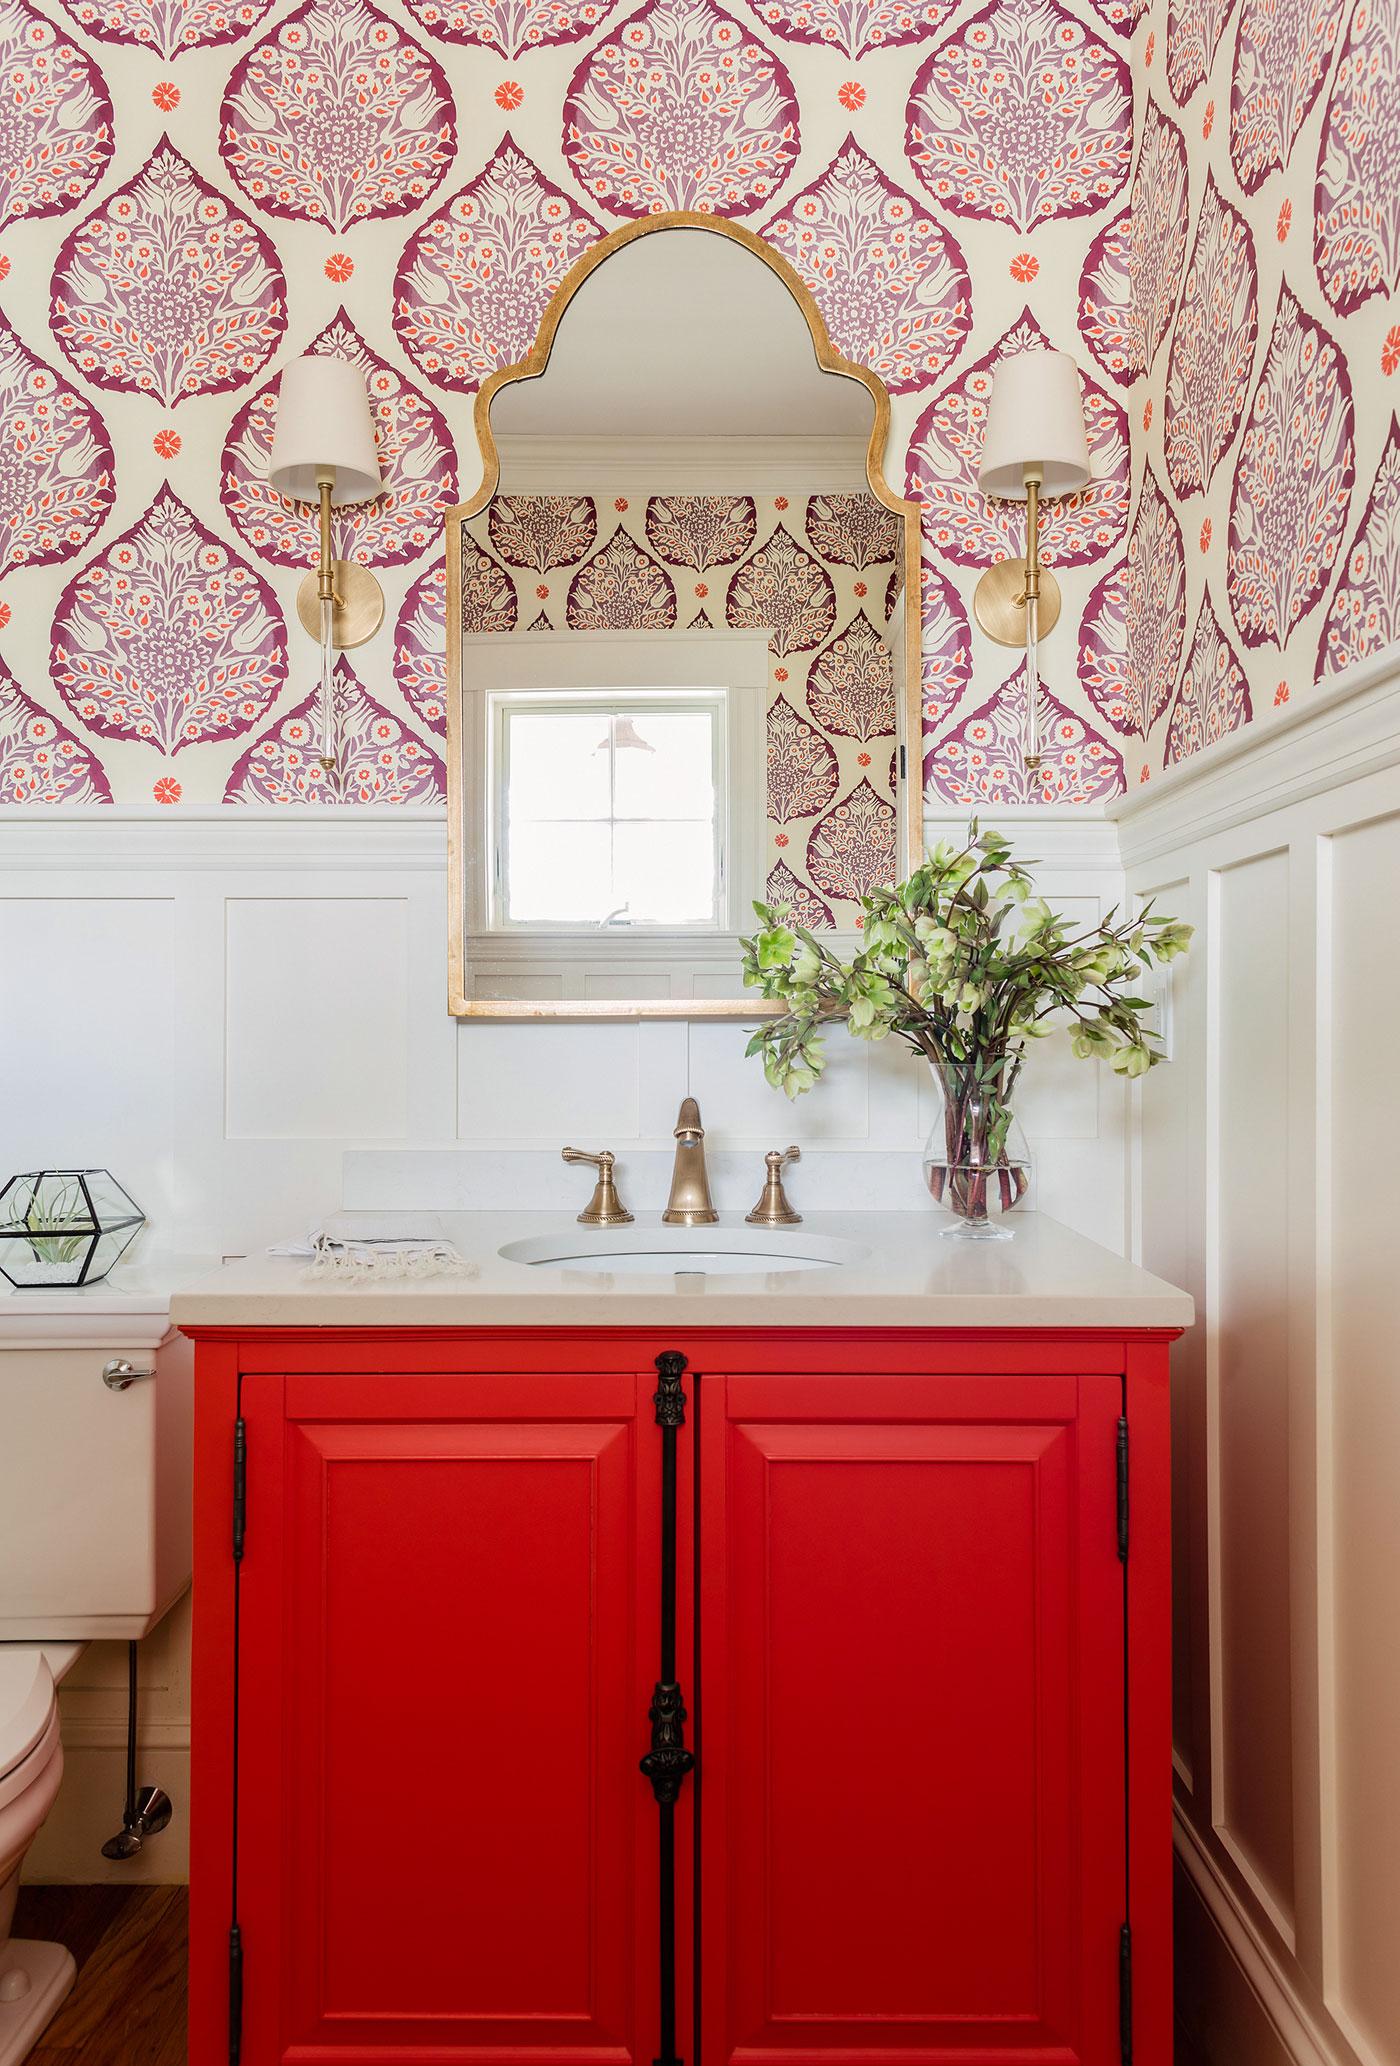 Colorful powder room with red cabinet doors and white paneled walls